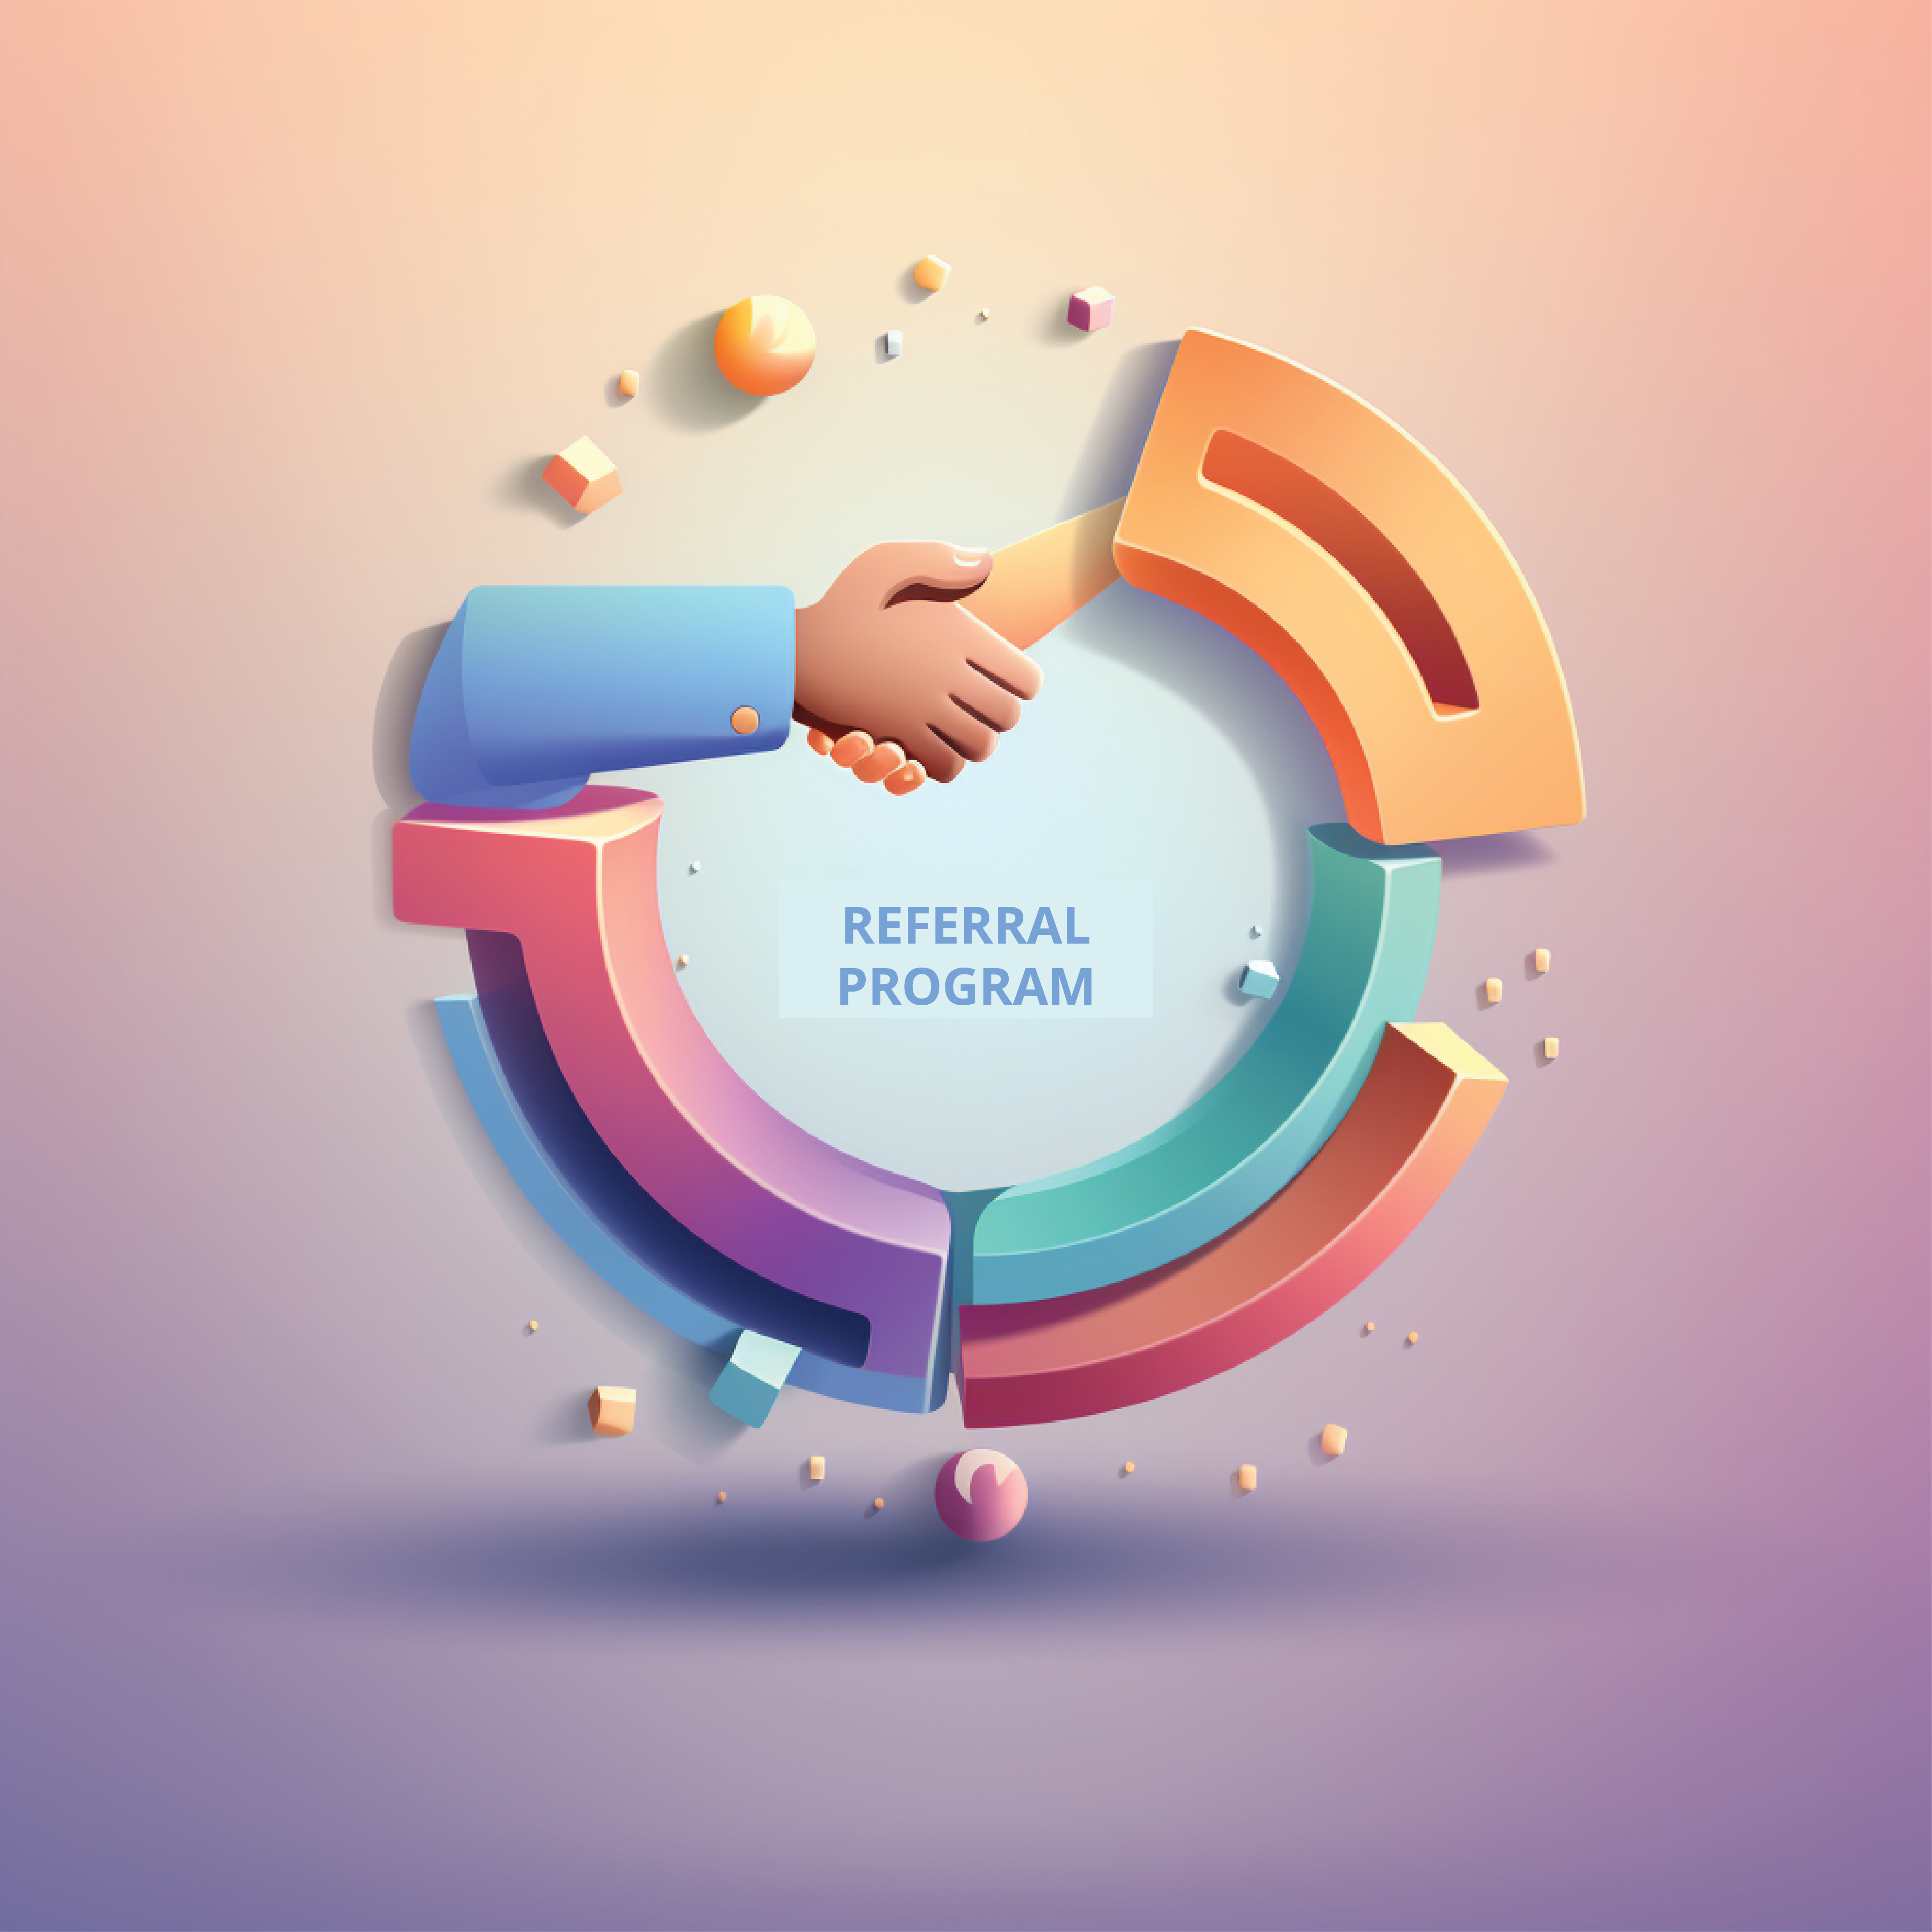 GETTING STARTED WITH RICHIE AI's REFERRAL PROGRAM